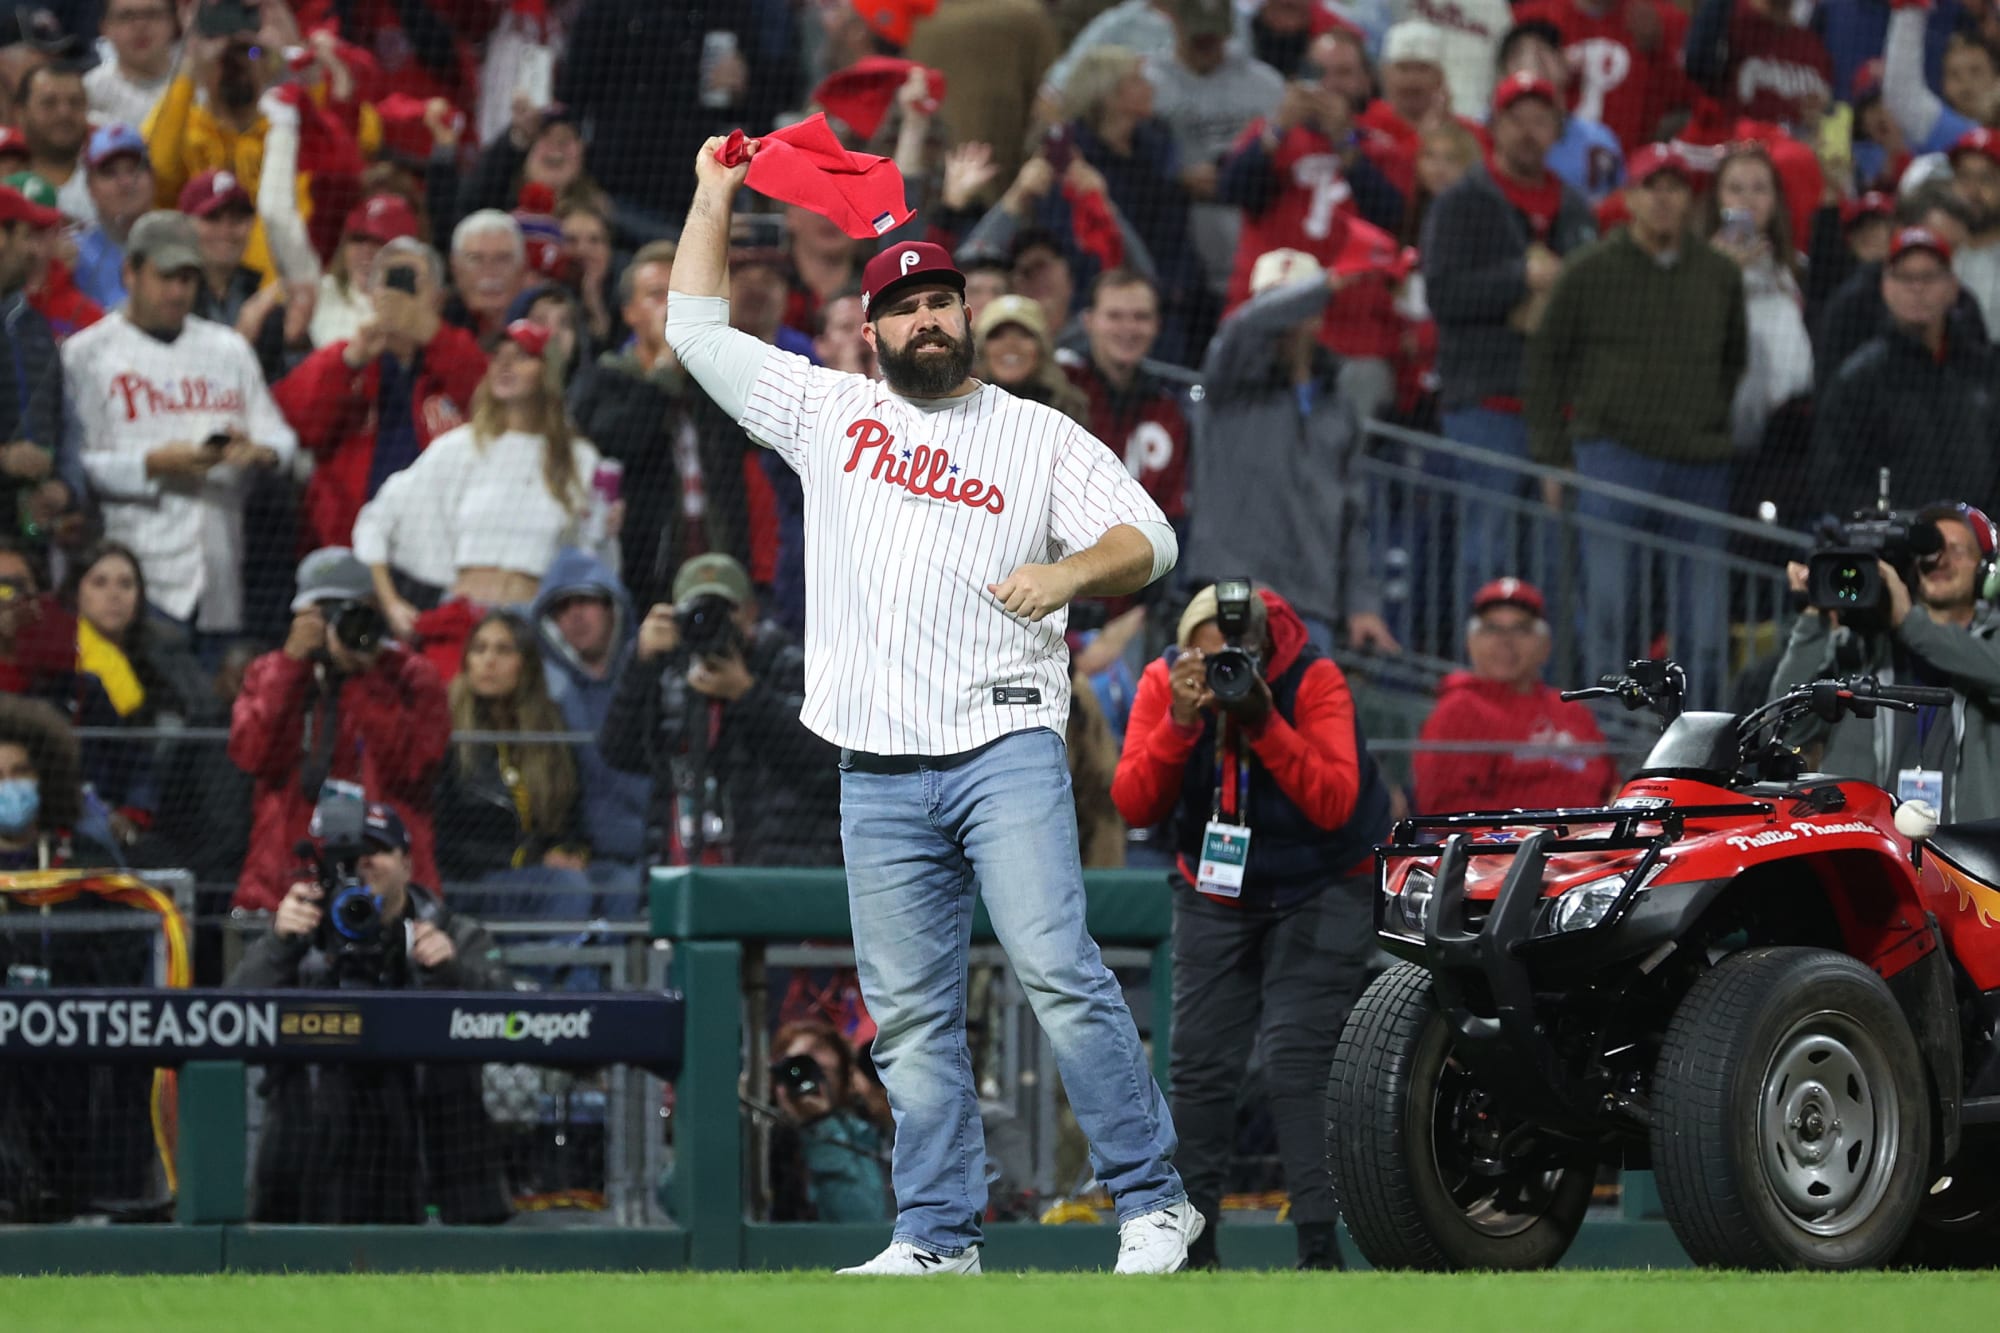 Jason Kelce is an option if the Phillie Phanatic needs some time off